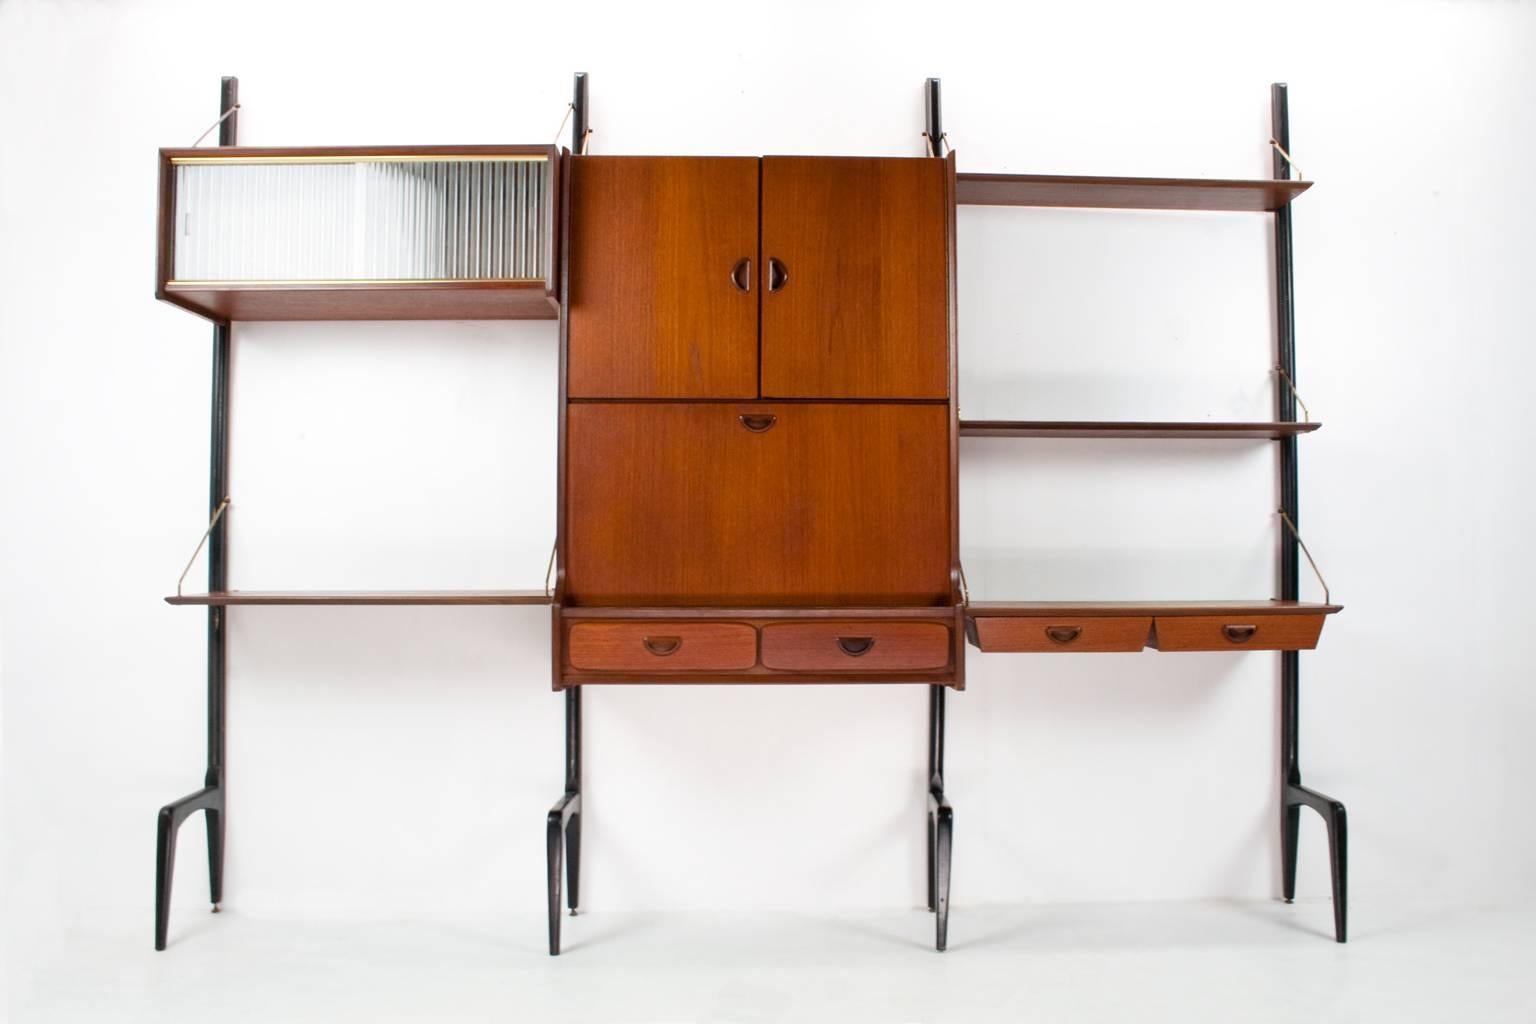 Dutch Mid-Century Modern wall unit in teak veneer and black lacquered wooden uprights by WéBé (Holland) and designed by Louis Van Teeffelen in the 1950s. Brand present and in excellent condition.

This modular wall unit is equipped with a rare